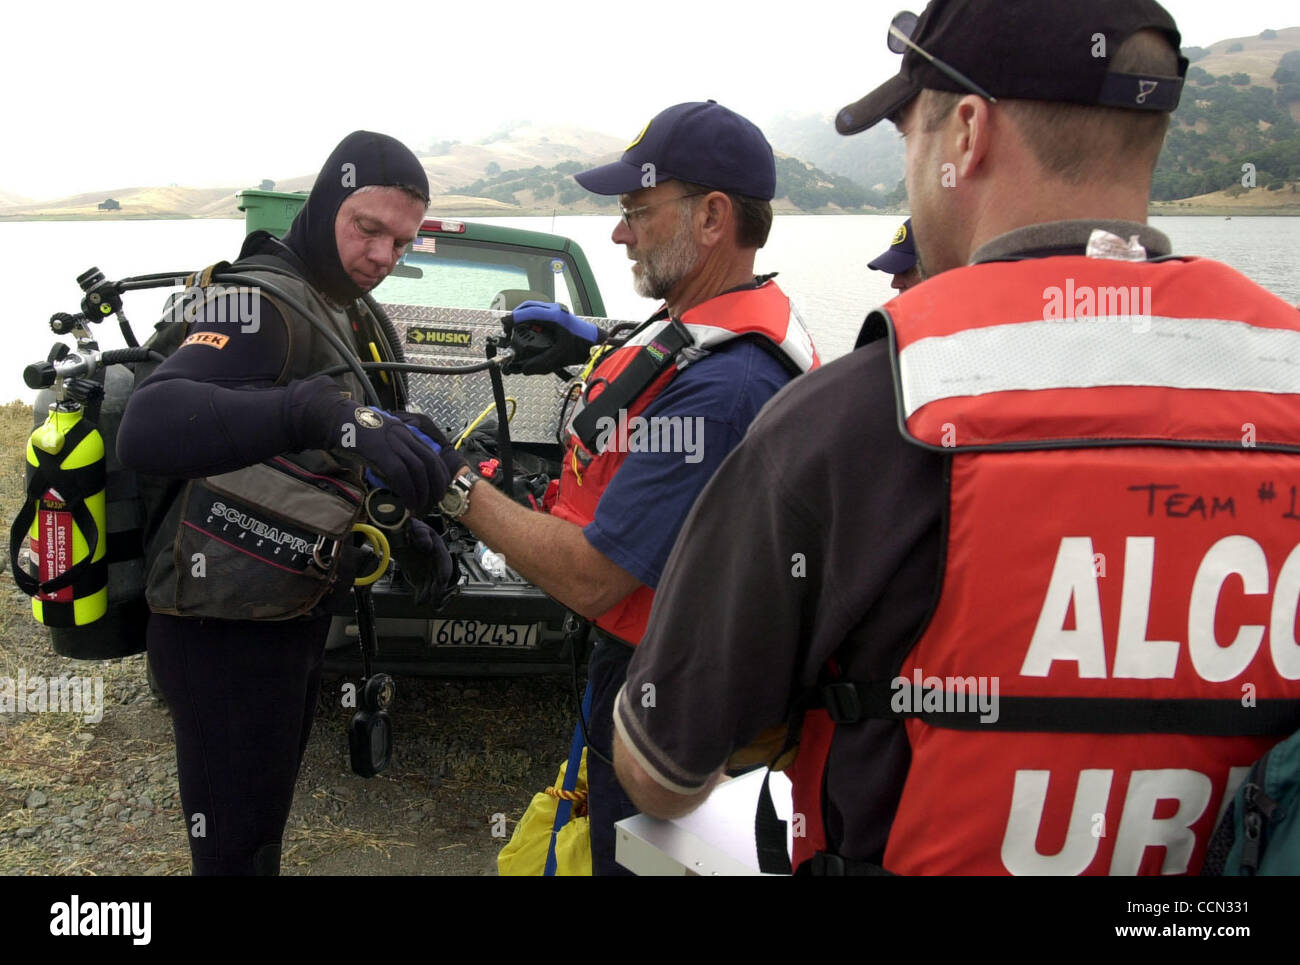 Alameda County Office of Emergency Services Search and Rescue teams hold a training and practice day at the San Antonio Reservoir where tender diver Fred Butler, center, checks the equipment on diver Robert Storer, both of Danville, before starting a diving exercise Saturday, July 24, 2004, in Sunol Stock Photo